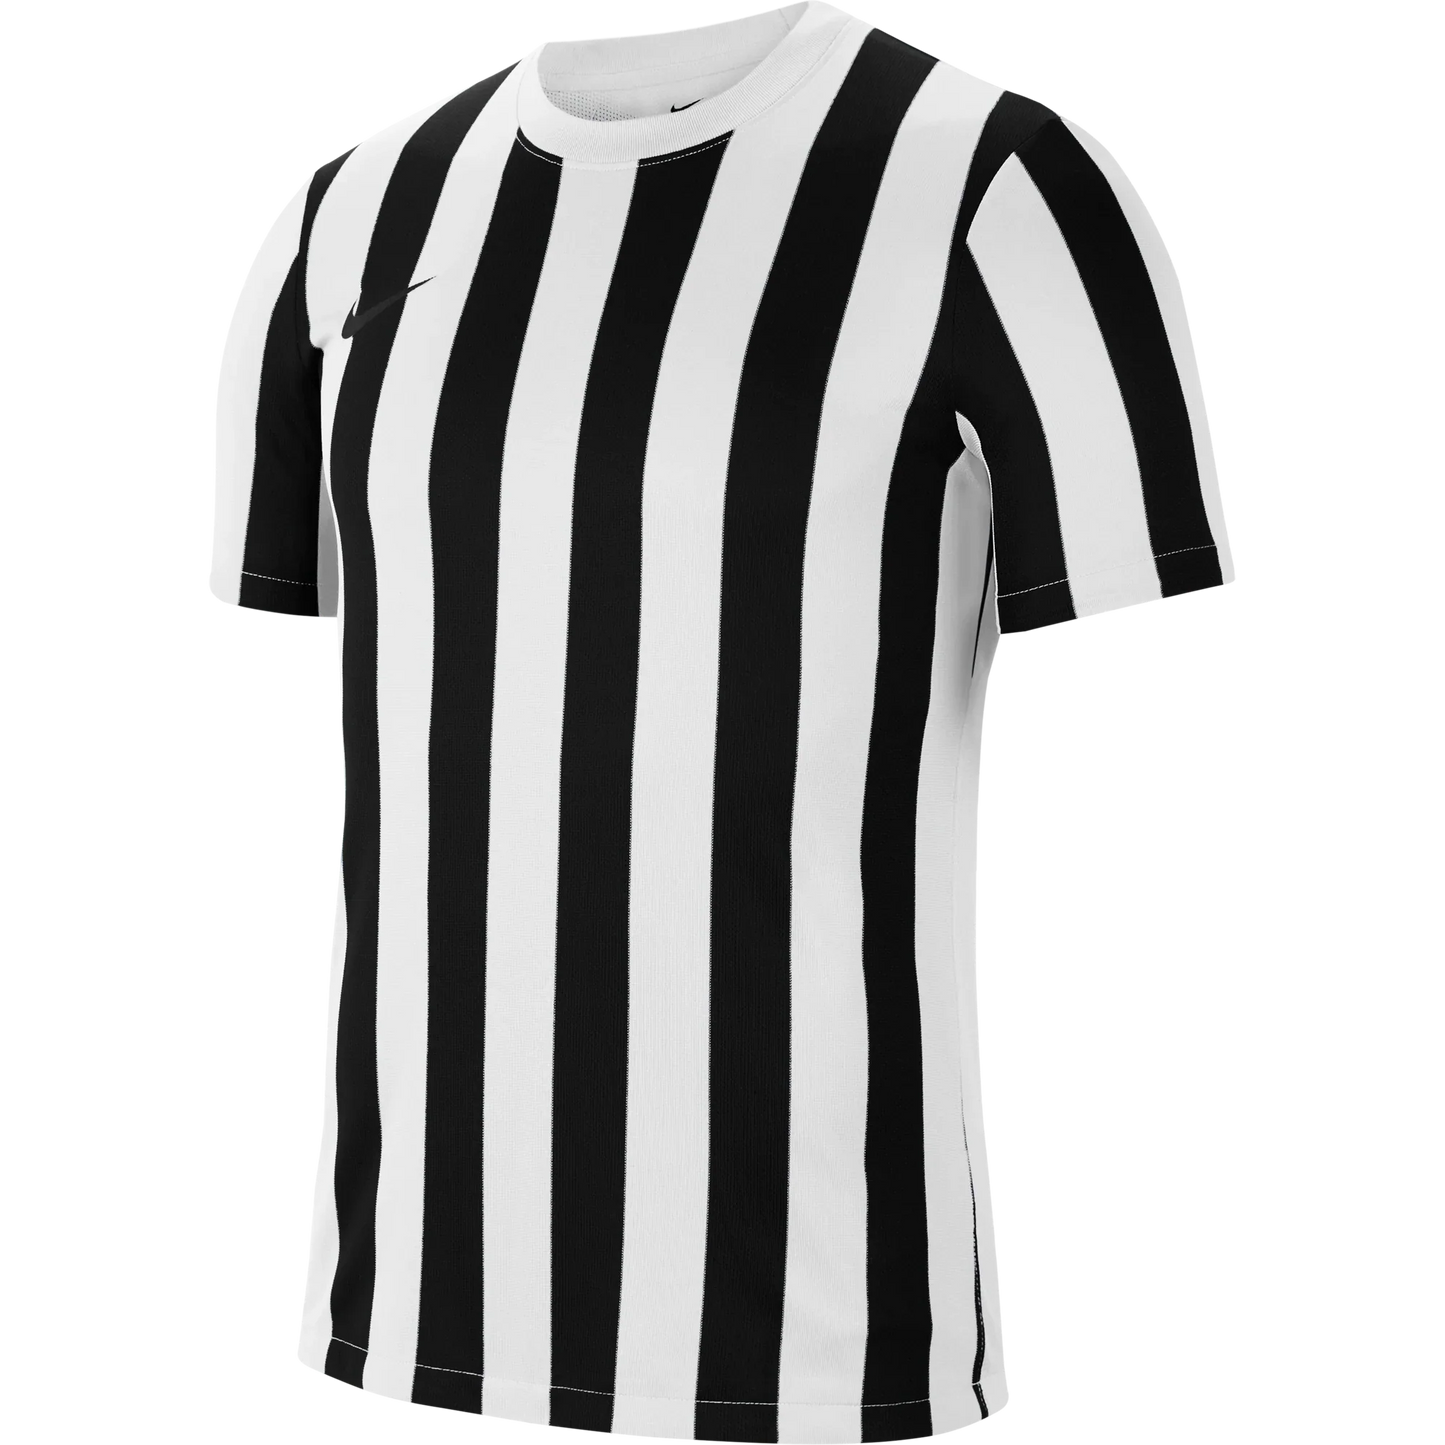 Striped Division IV Jersey S/S 2021